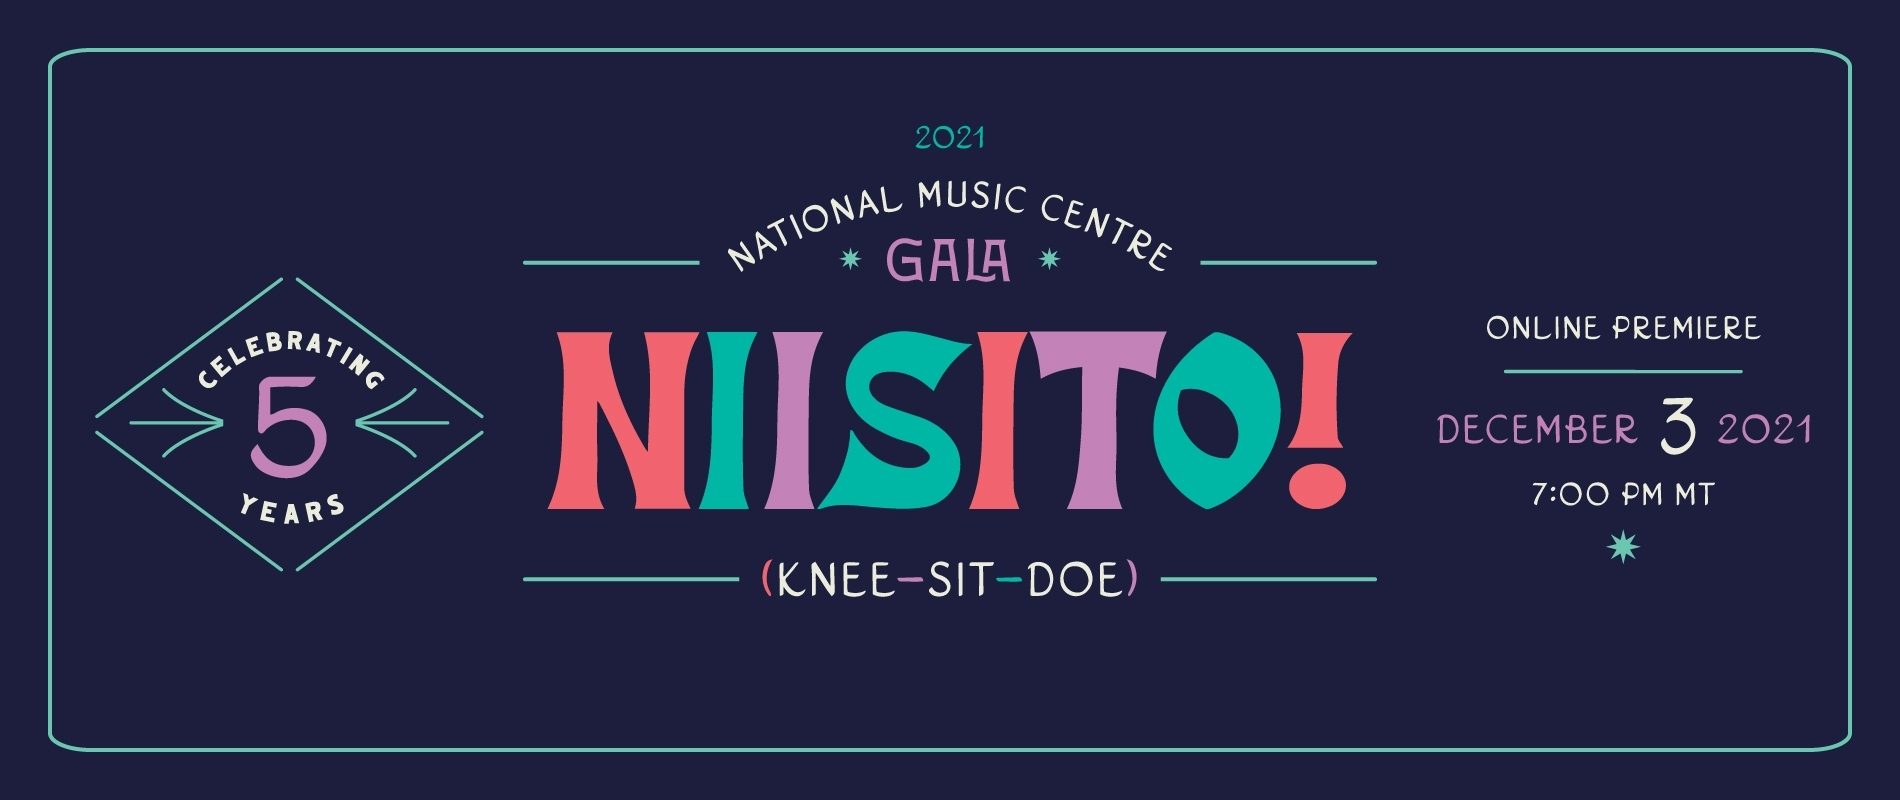 National Music Centre Unveils Full Lineup for Virtual Fundraising Gala Premiering on December 3